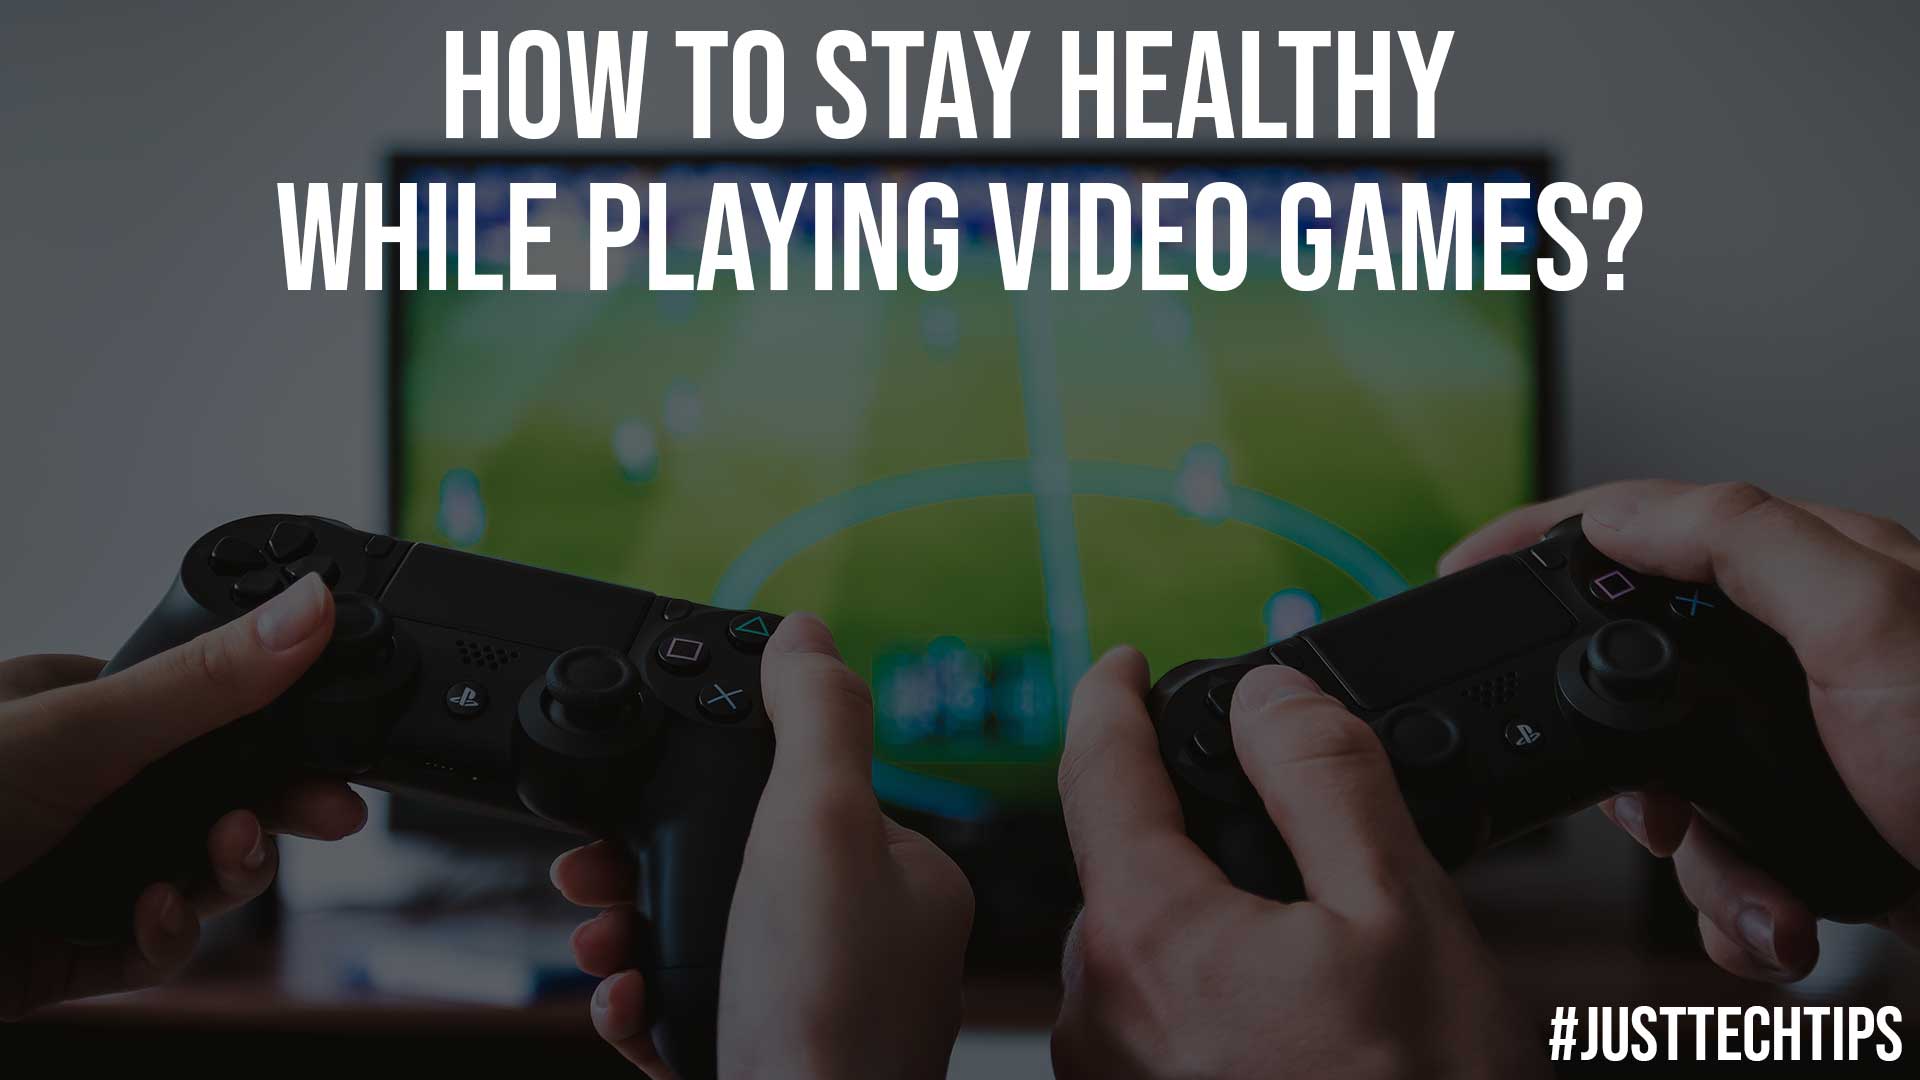 How to Stay Healthy While Playing Video Games